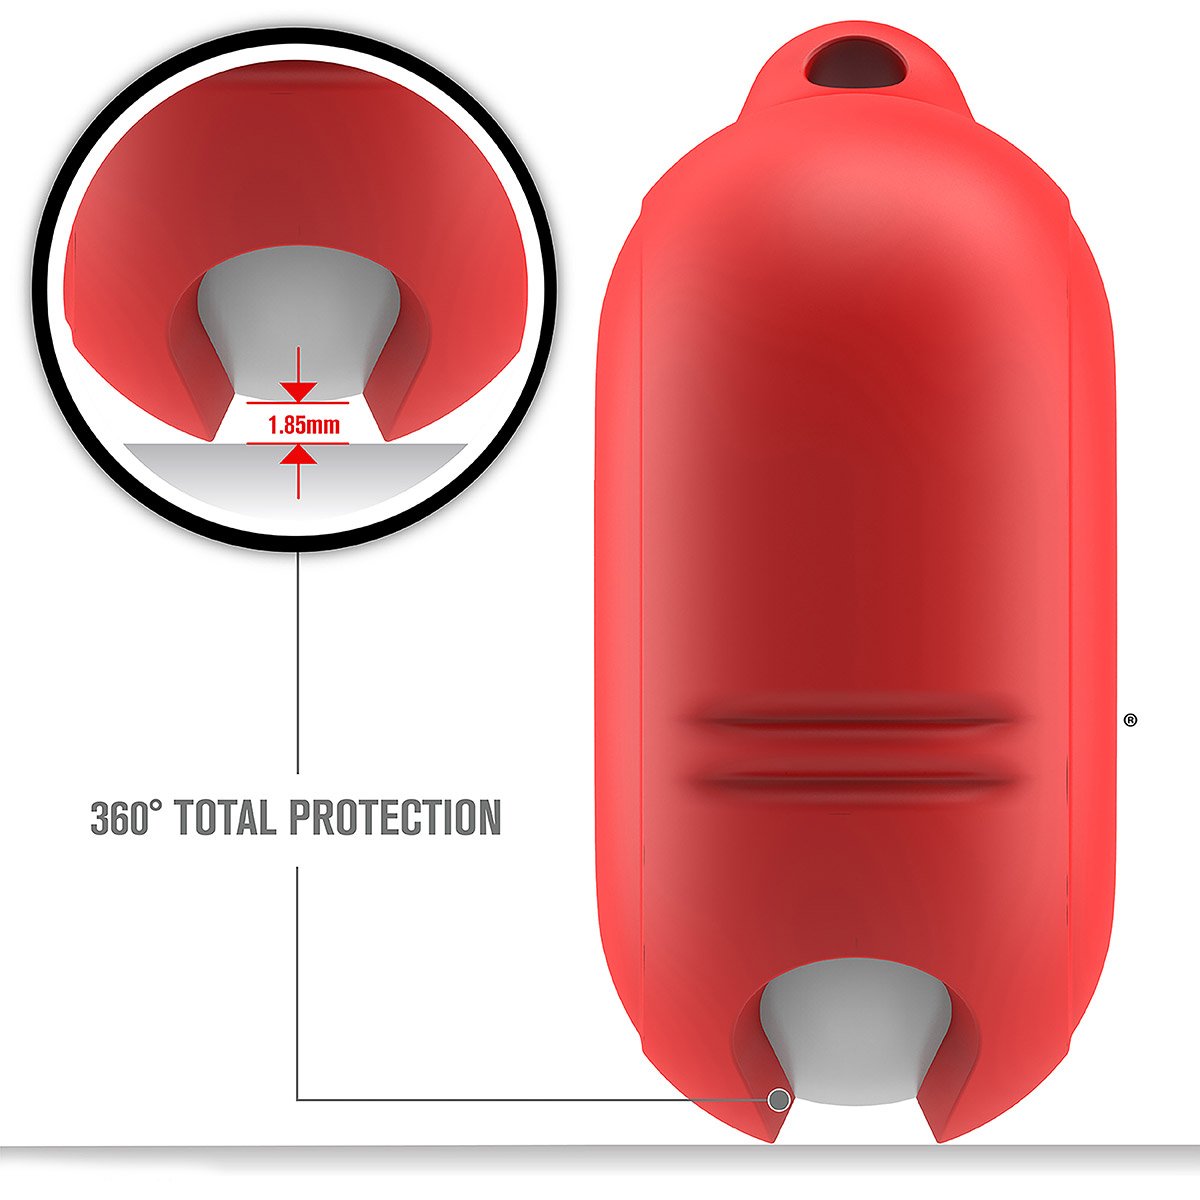 CATAPDPRORED | catalyst airpods pro gen 2 1 waterproof case carabiner flame red side view text reads 1.85mm 360 total protection